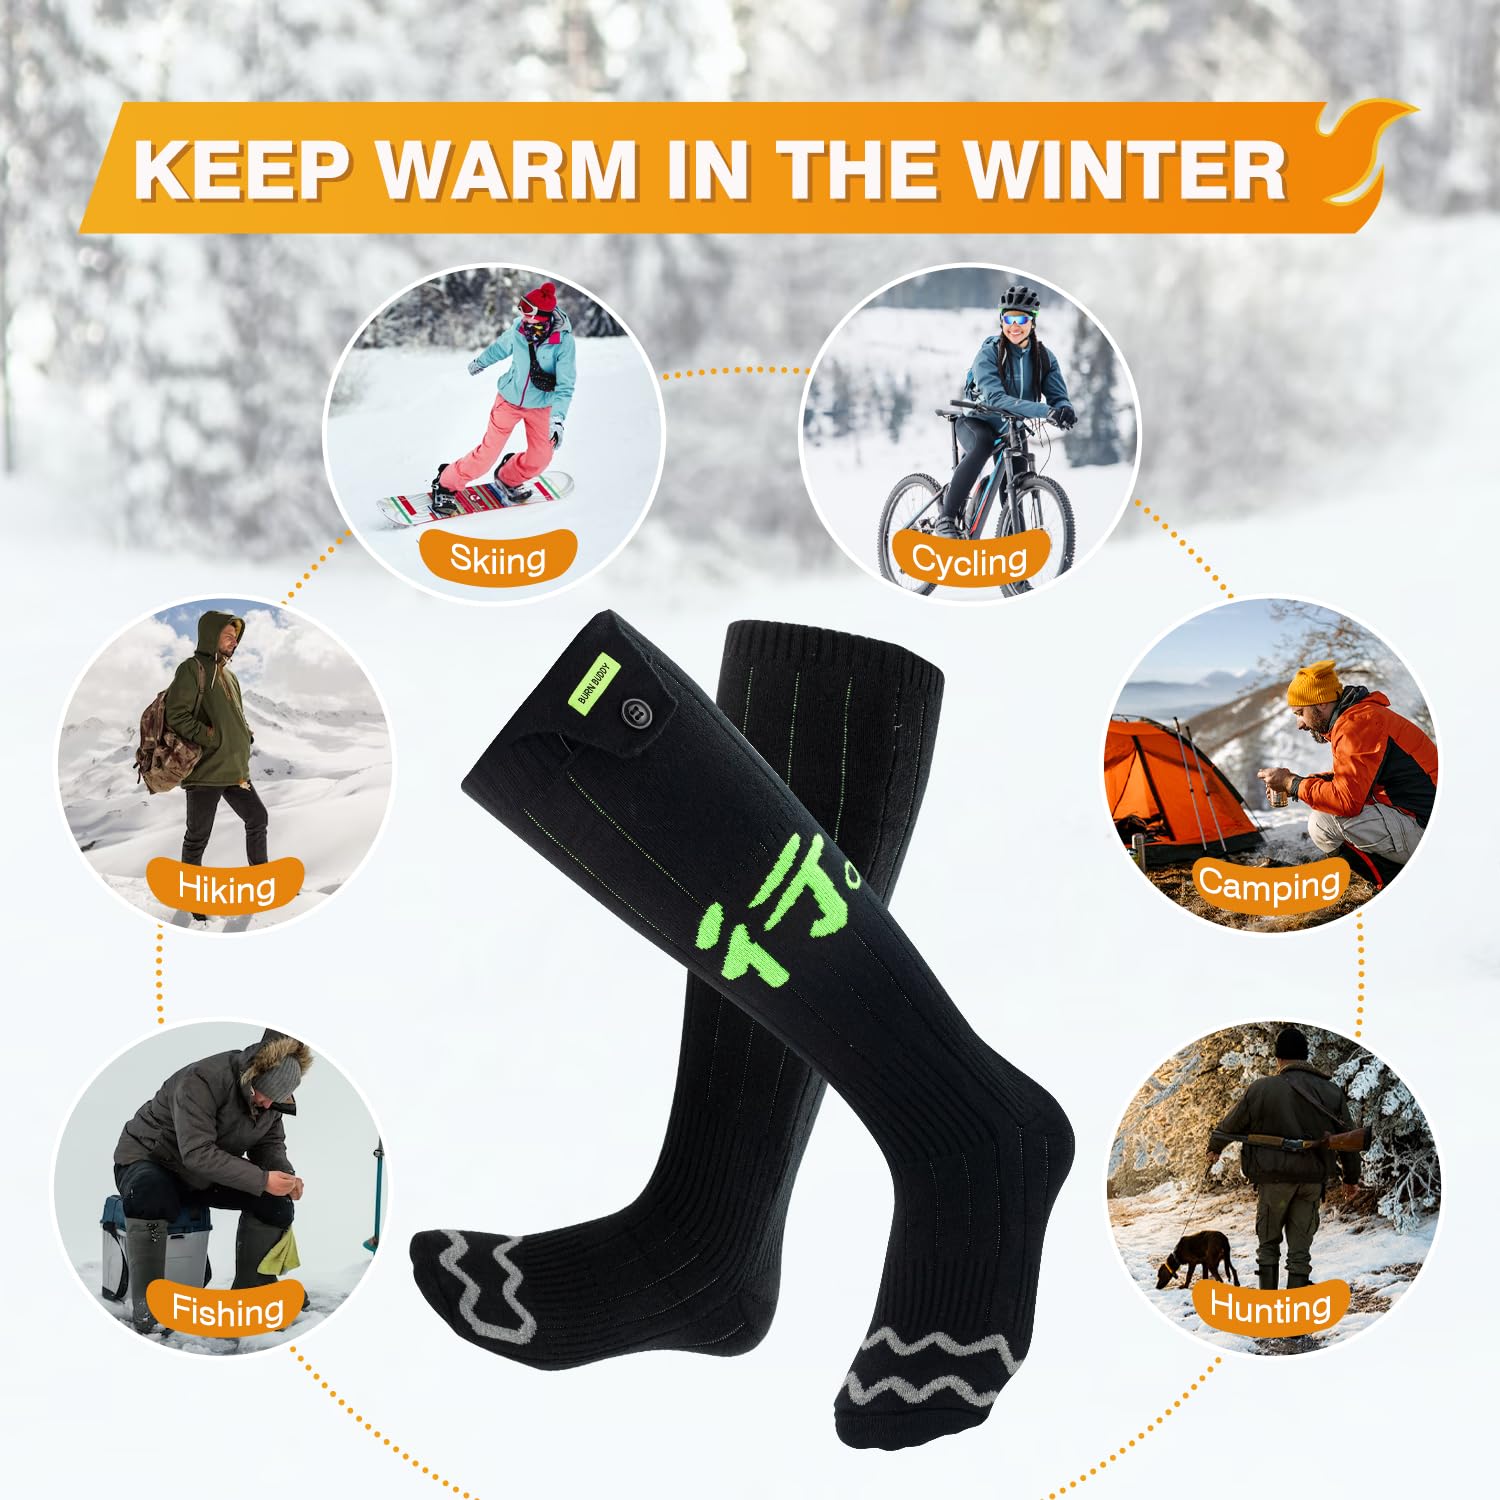 Heated Socks, Electric Socks with App Control, 5000mAh Rechargeable Heated Socks for Men, Washable Heated Socks Women, Foot Warmer for Winter Camping Hunting Outdoors Heating Socks Warm Socks -XL